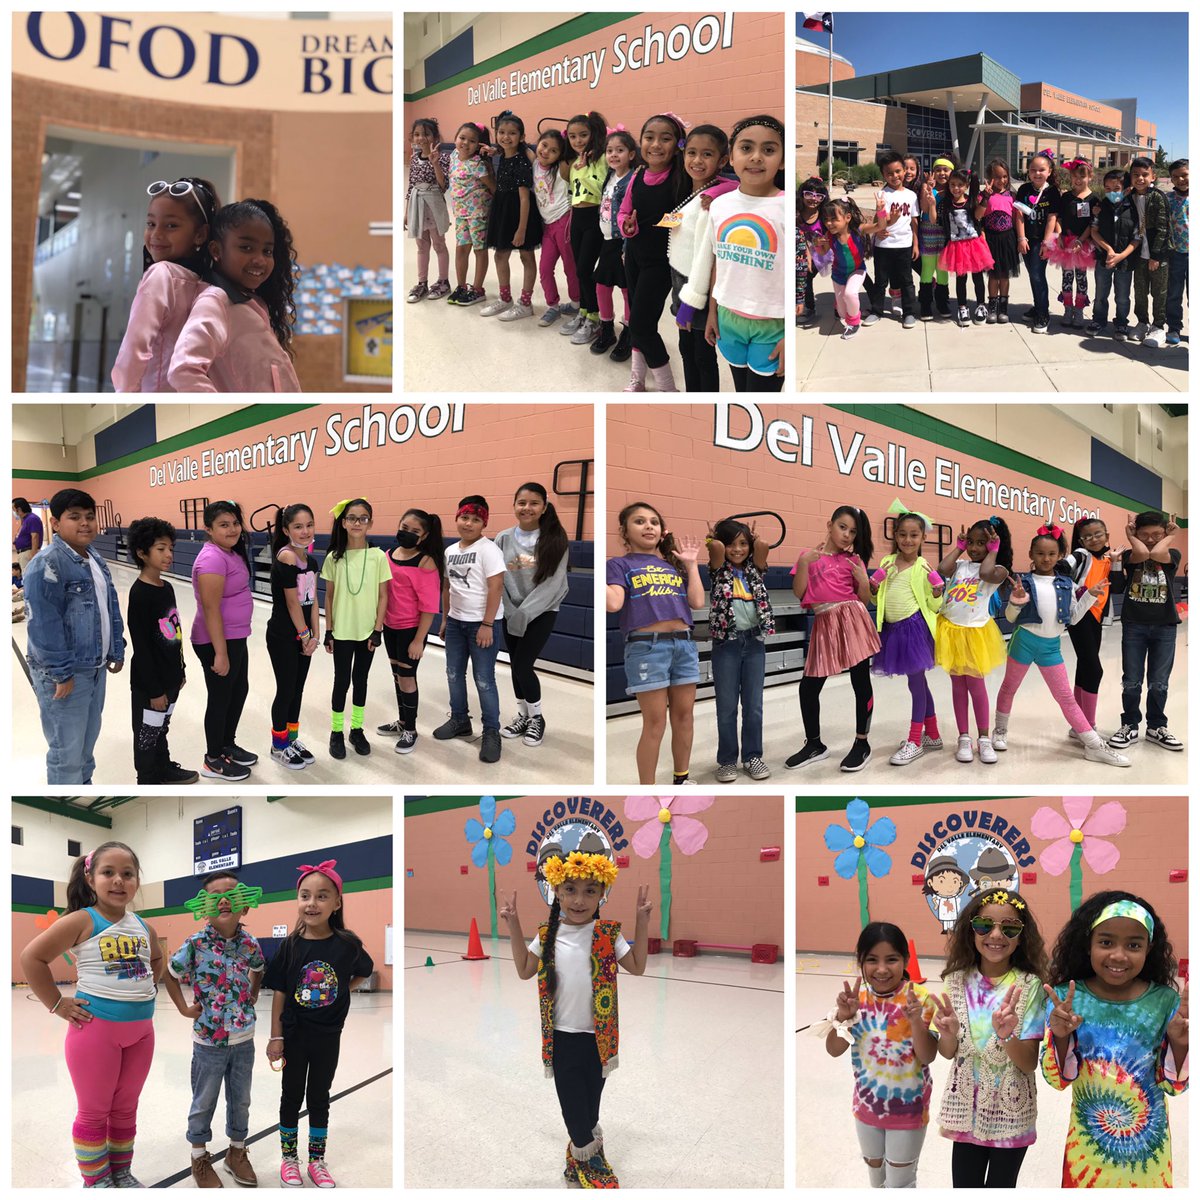 There’s no place like #Home💙! Our @DelValleES_YISD discoverers partied through the decades for @DVHSYISD homecoming week🎉🥳!#DelValleLearningCommunity #ILovePE #DelValleESPE #OFOD #THEDISTRICT #FutureConquistadores